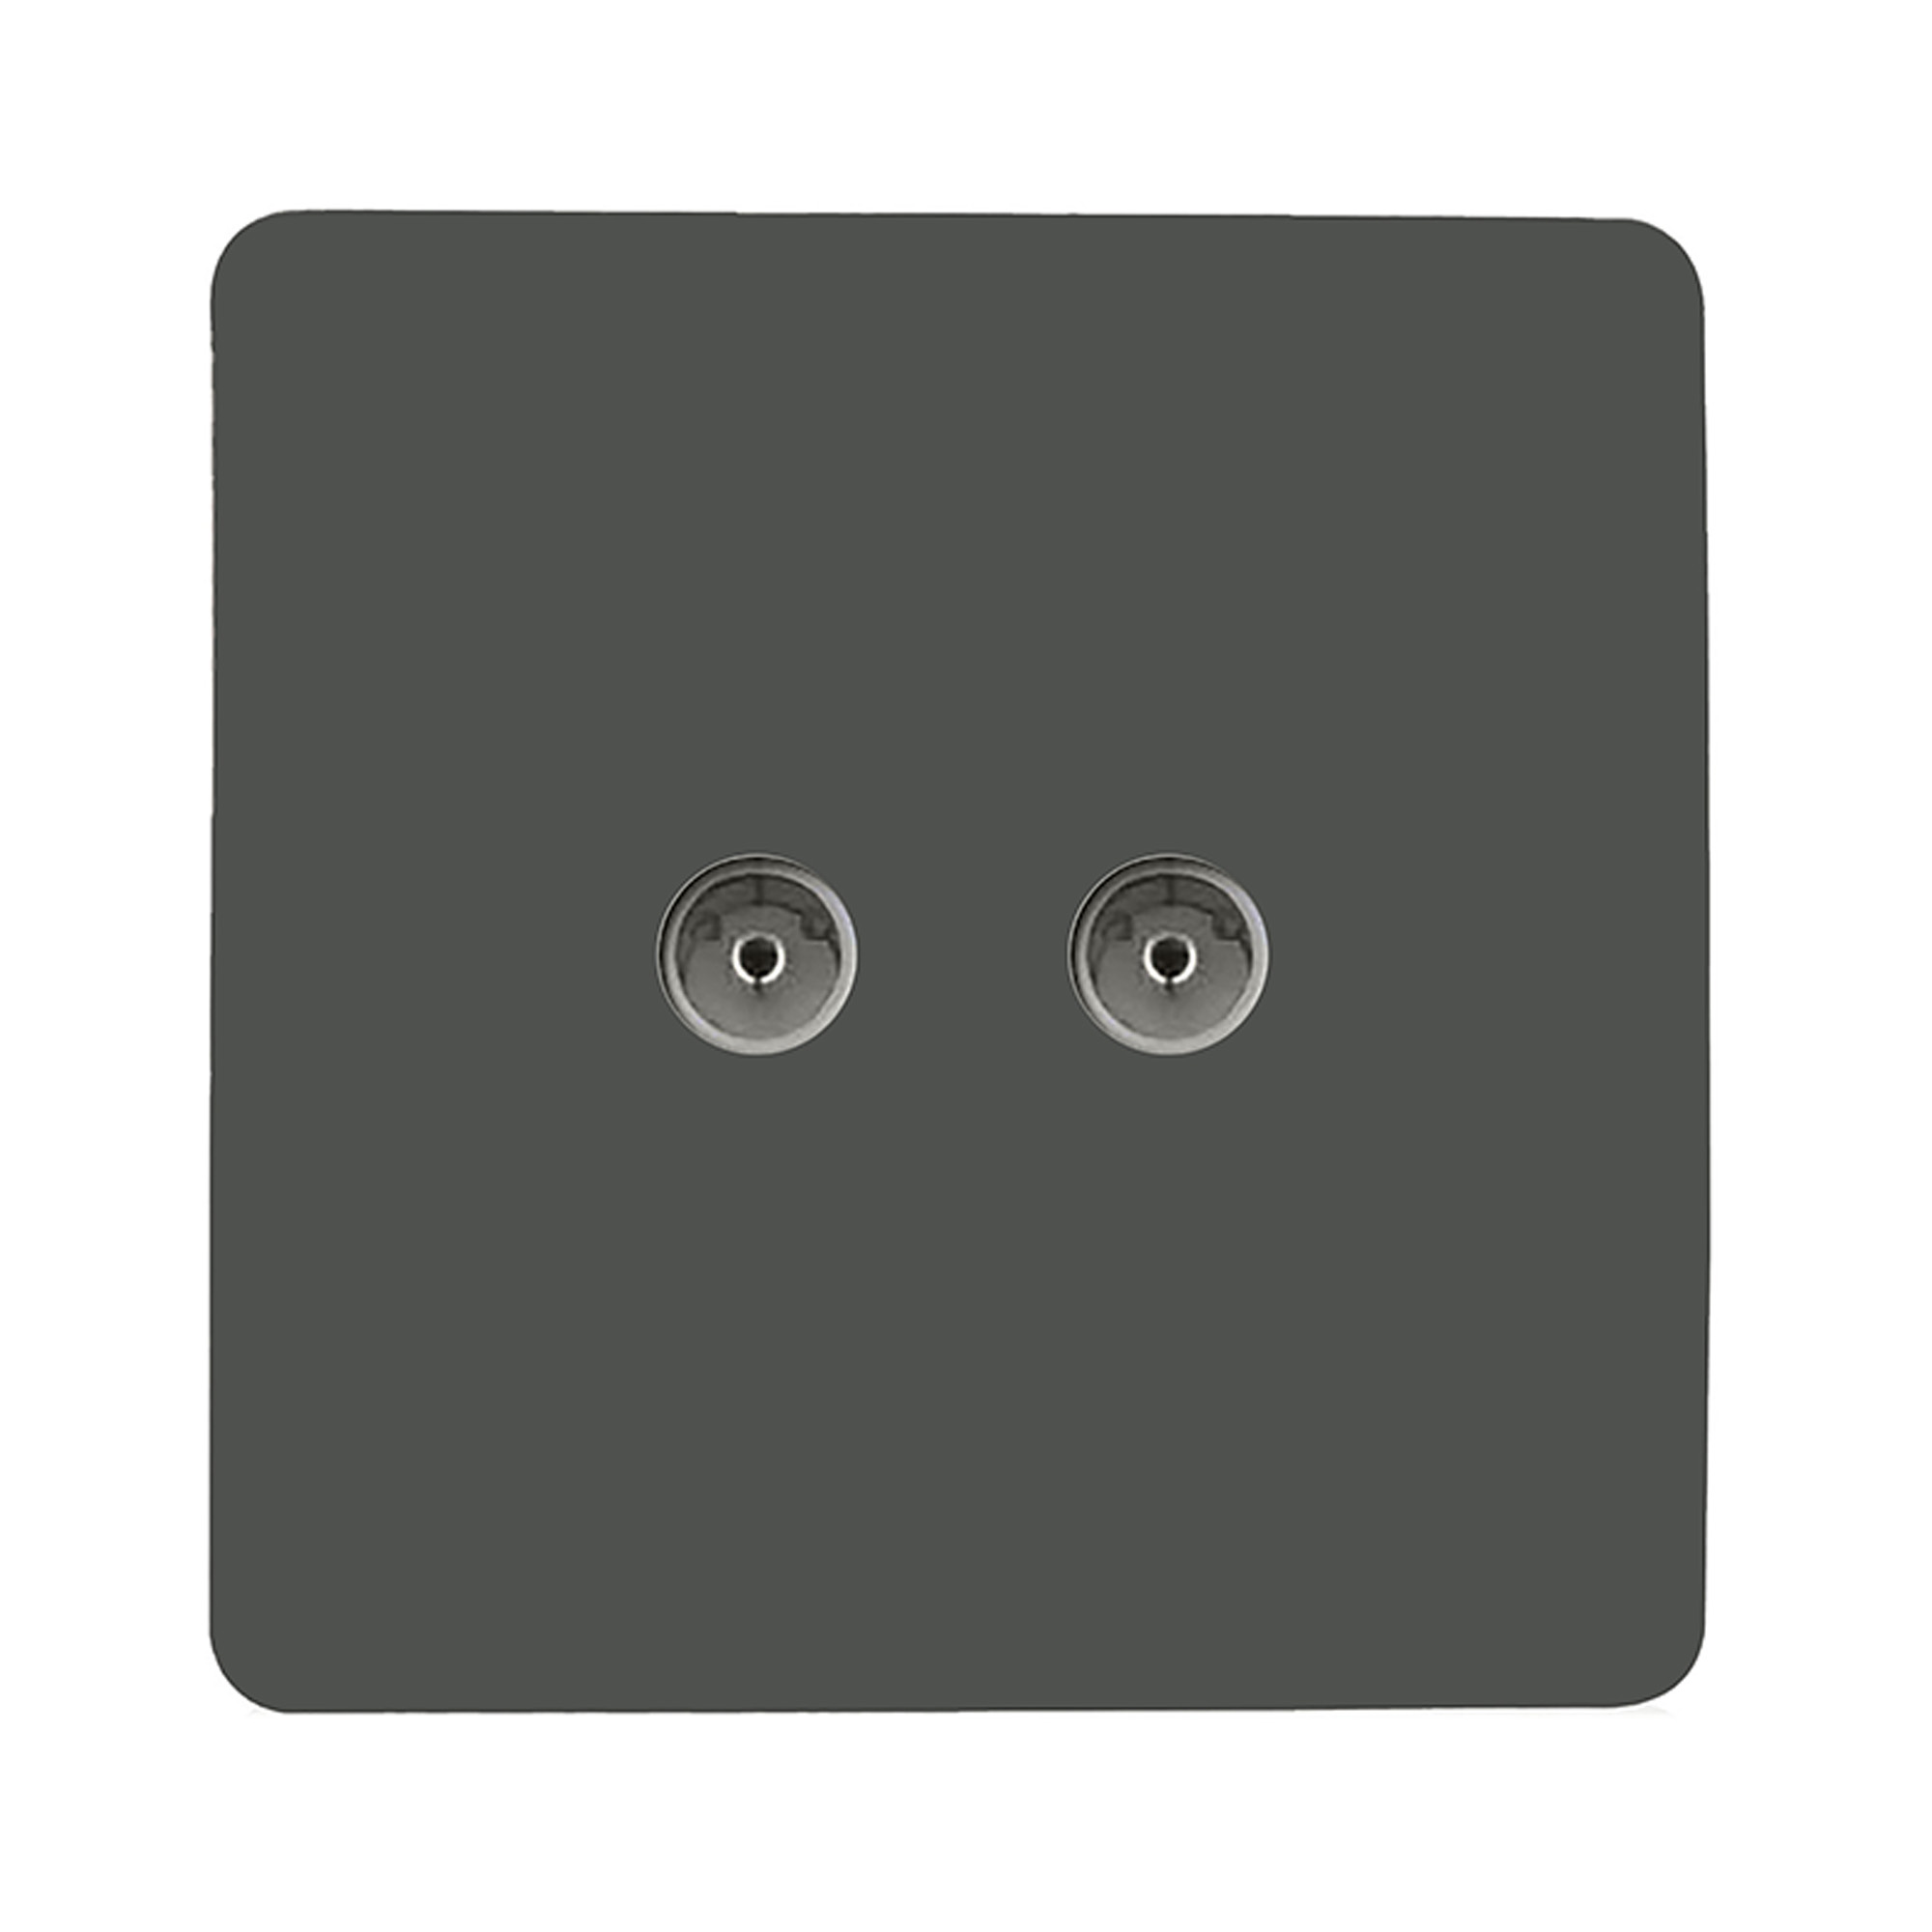 ART-2TVSCH  Twin TV Co-Axial Outlet Charcoal